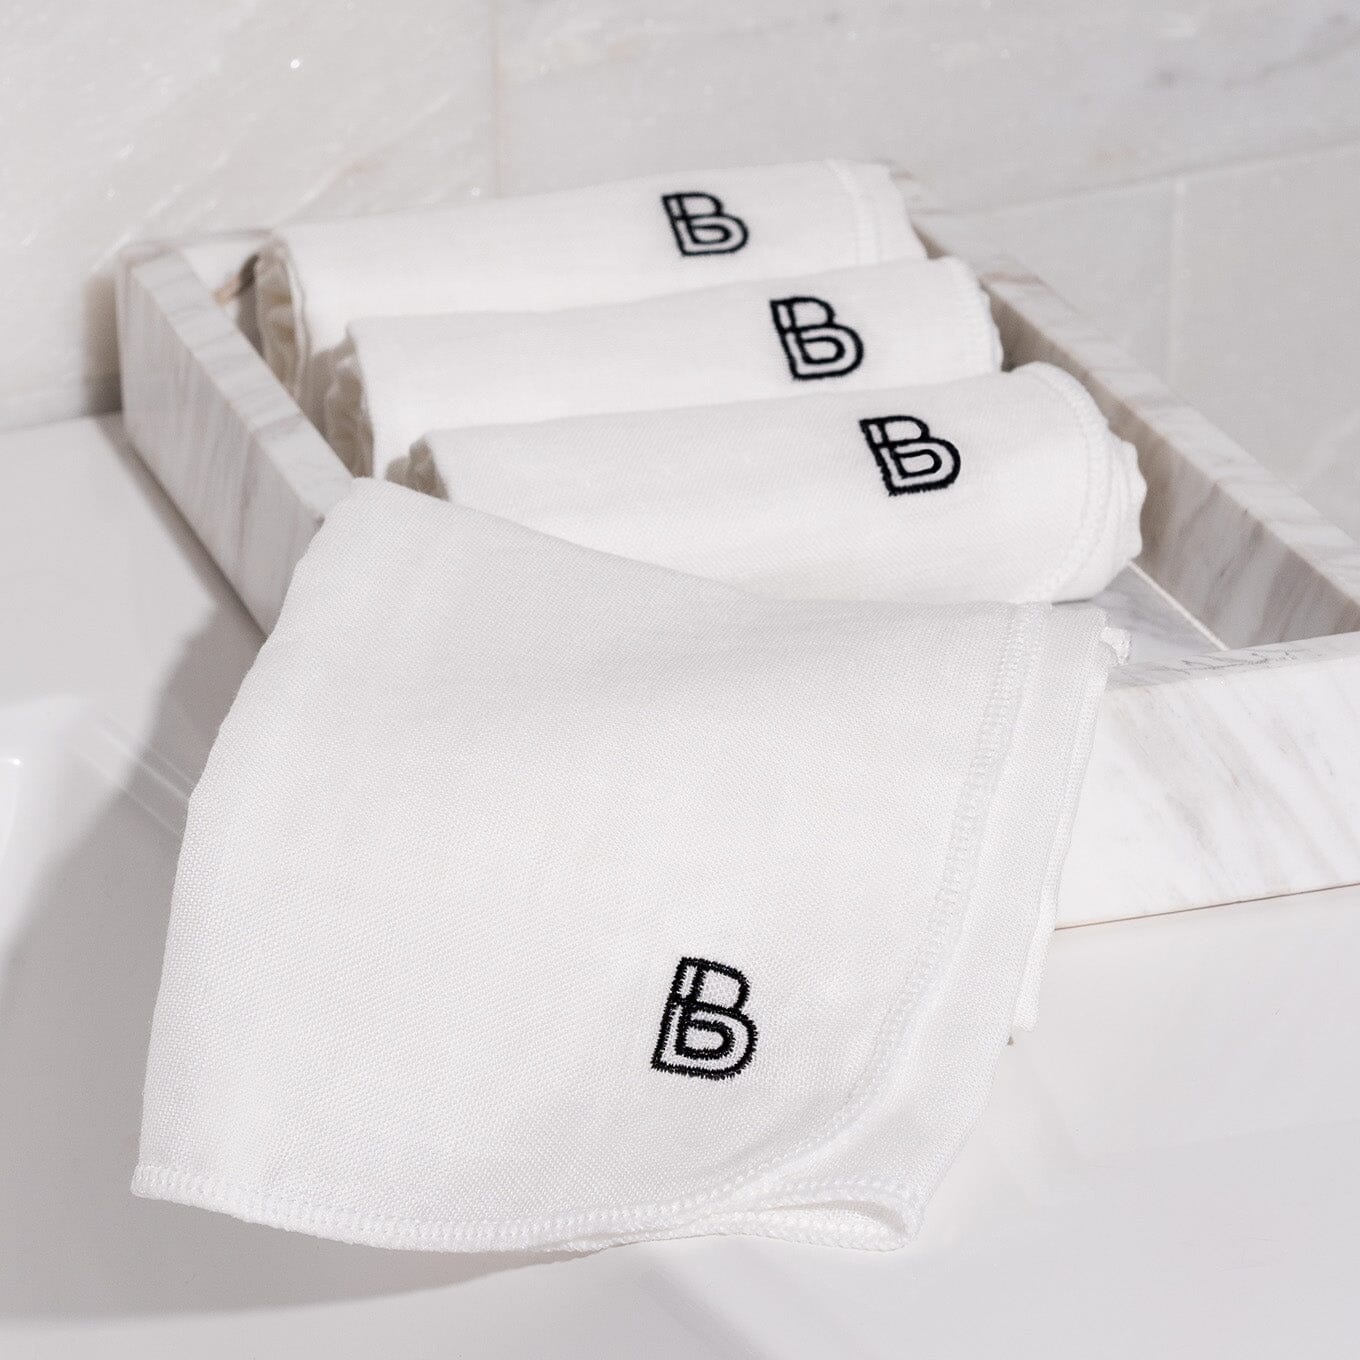 Boao 6 Packs Soft Cotton Muslin Cloth or Bags, Suit for Straining Fruit, Butter, Wine, Milk Filter in Home (50 x 30 cm, Muslin Bag)